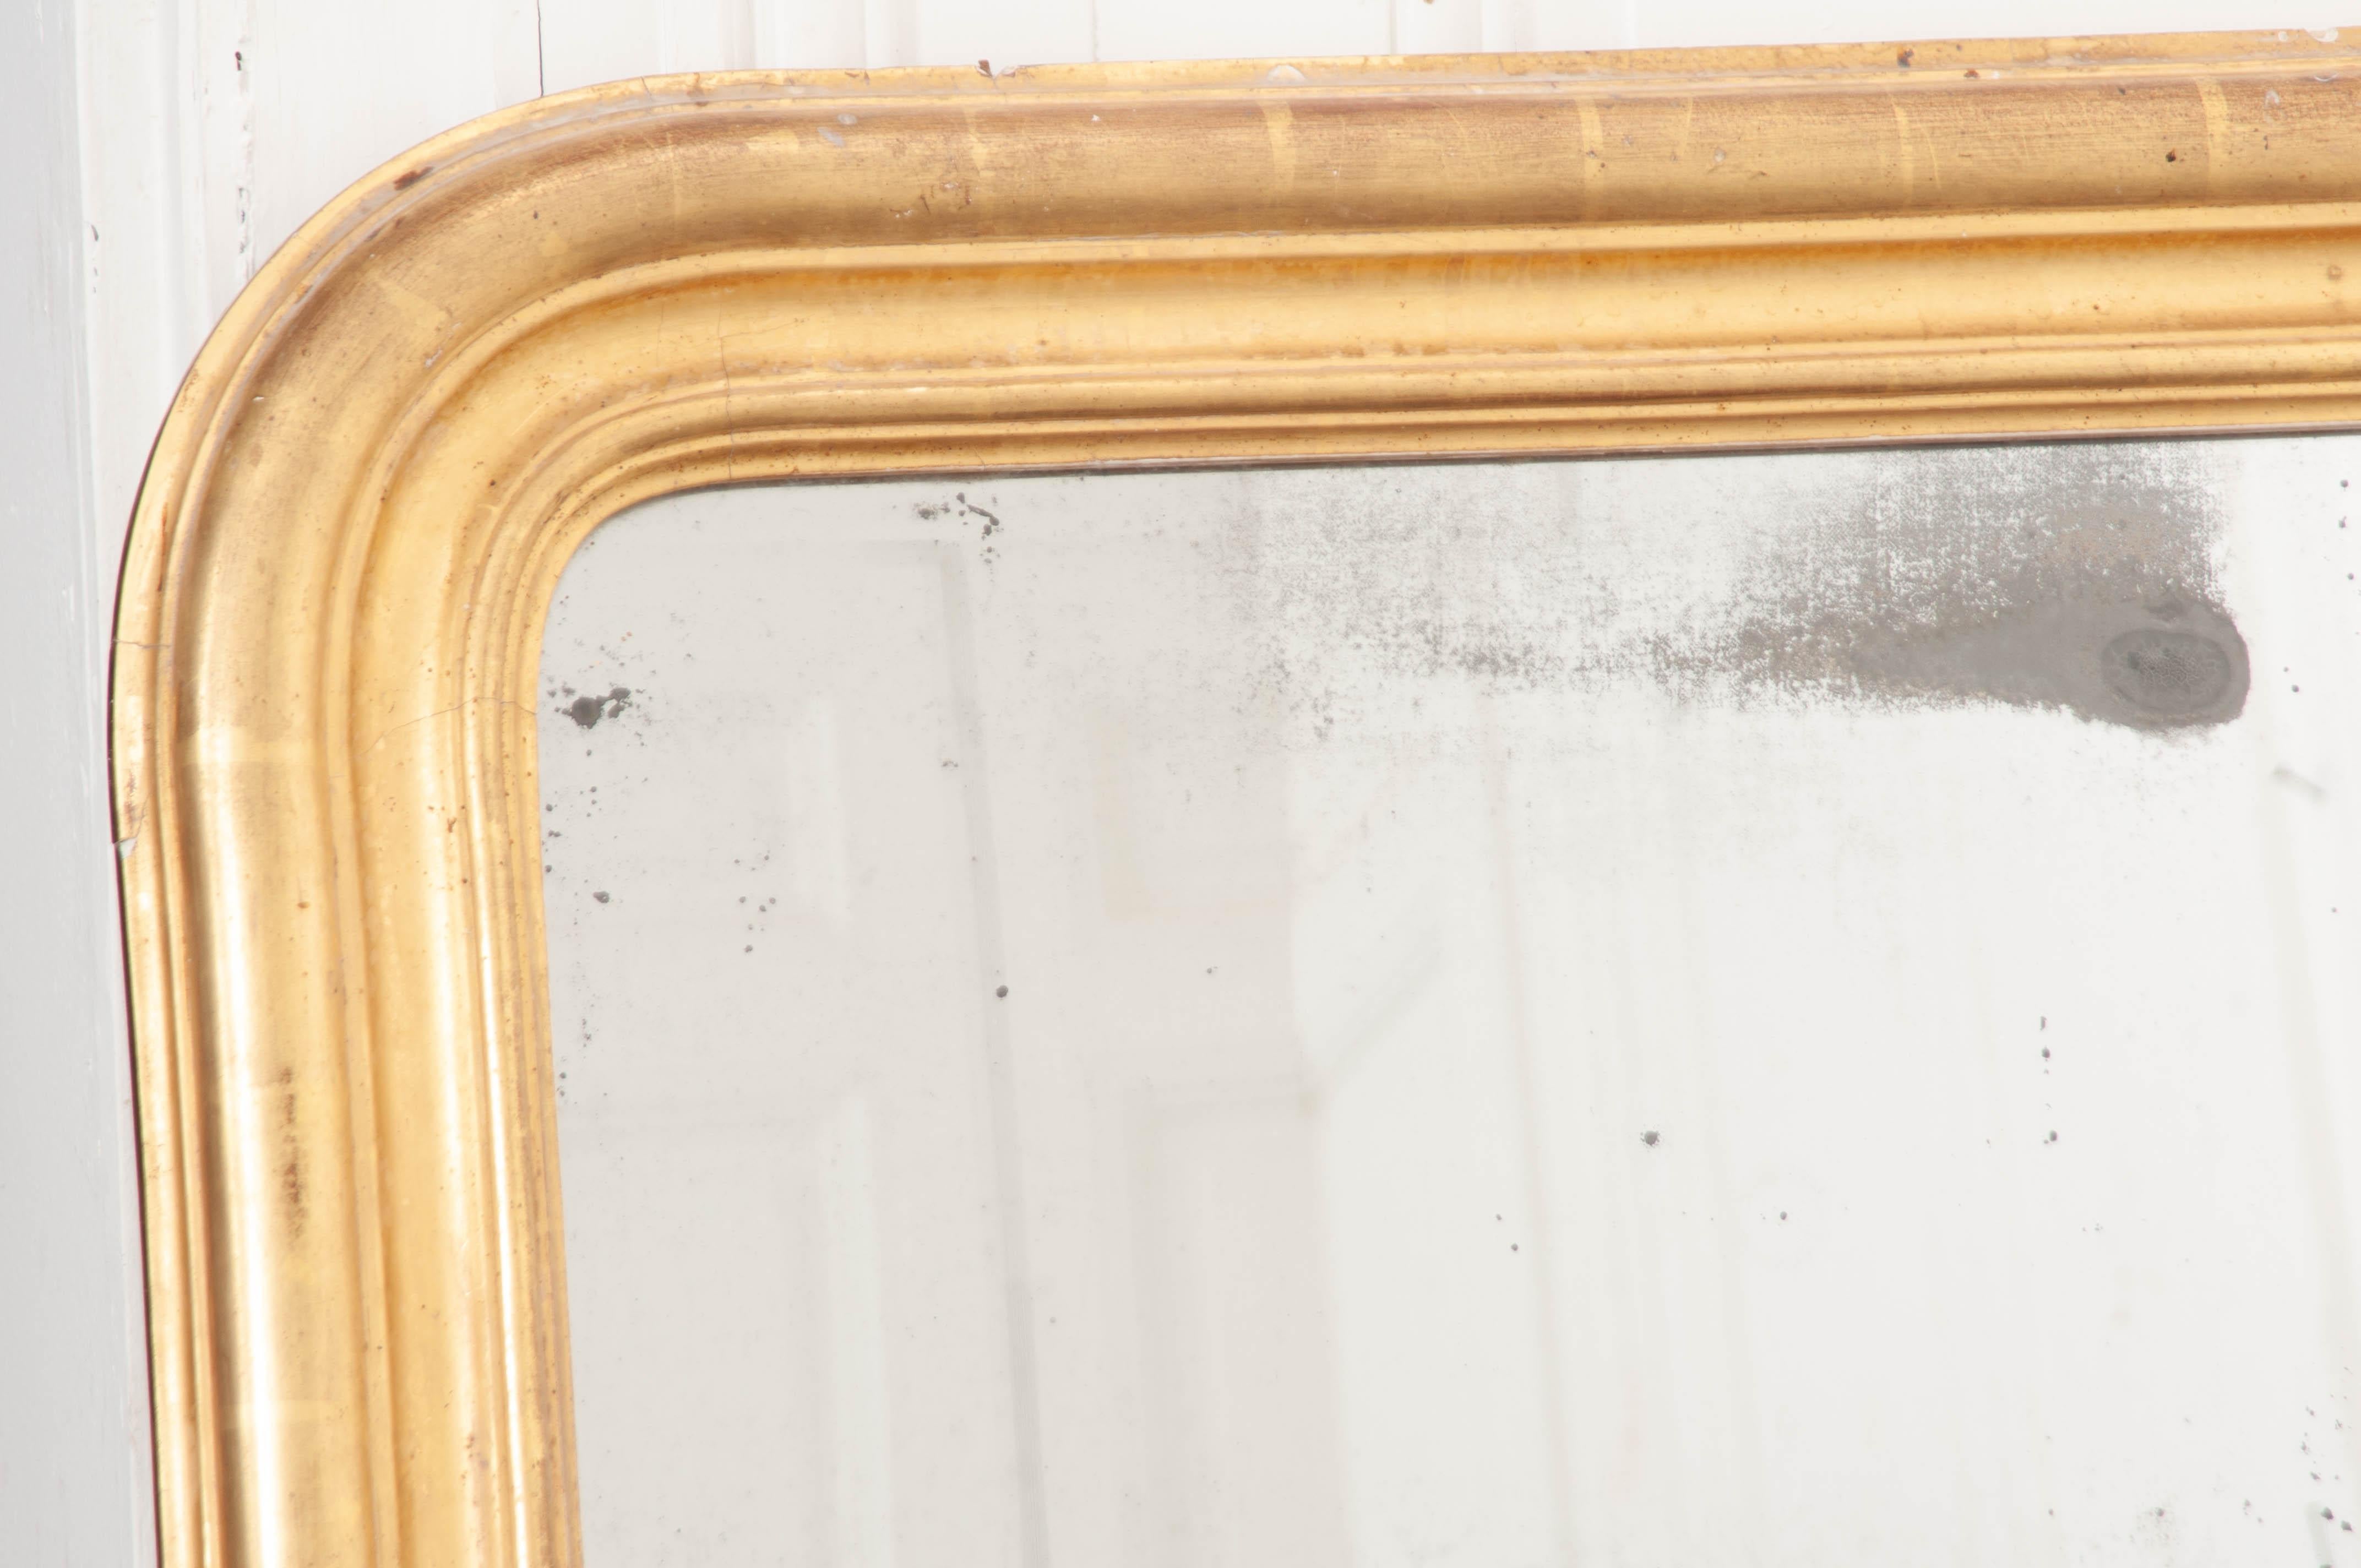 A generously proportioned gold giltwood Louis Philippe mirror from 19th century, France. The classically-formed mirror has the familiar Louis Philippe silhouette: linear sides and bottom, with curved top corners. This mirror’s frame is carved in a